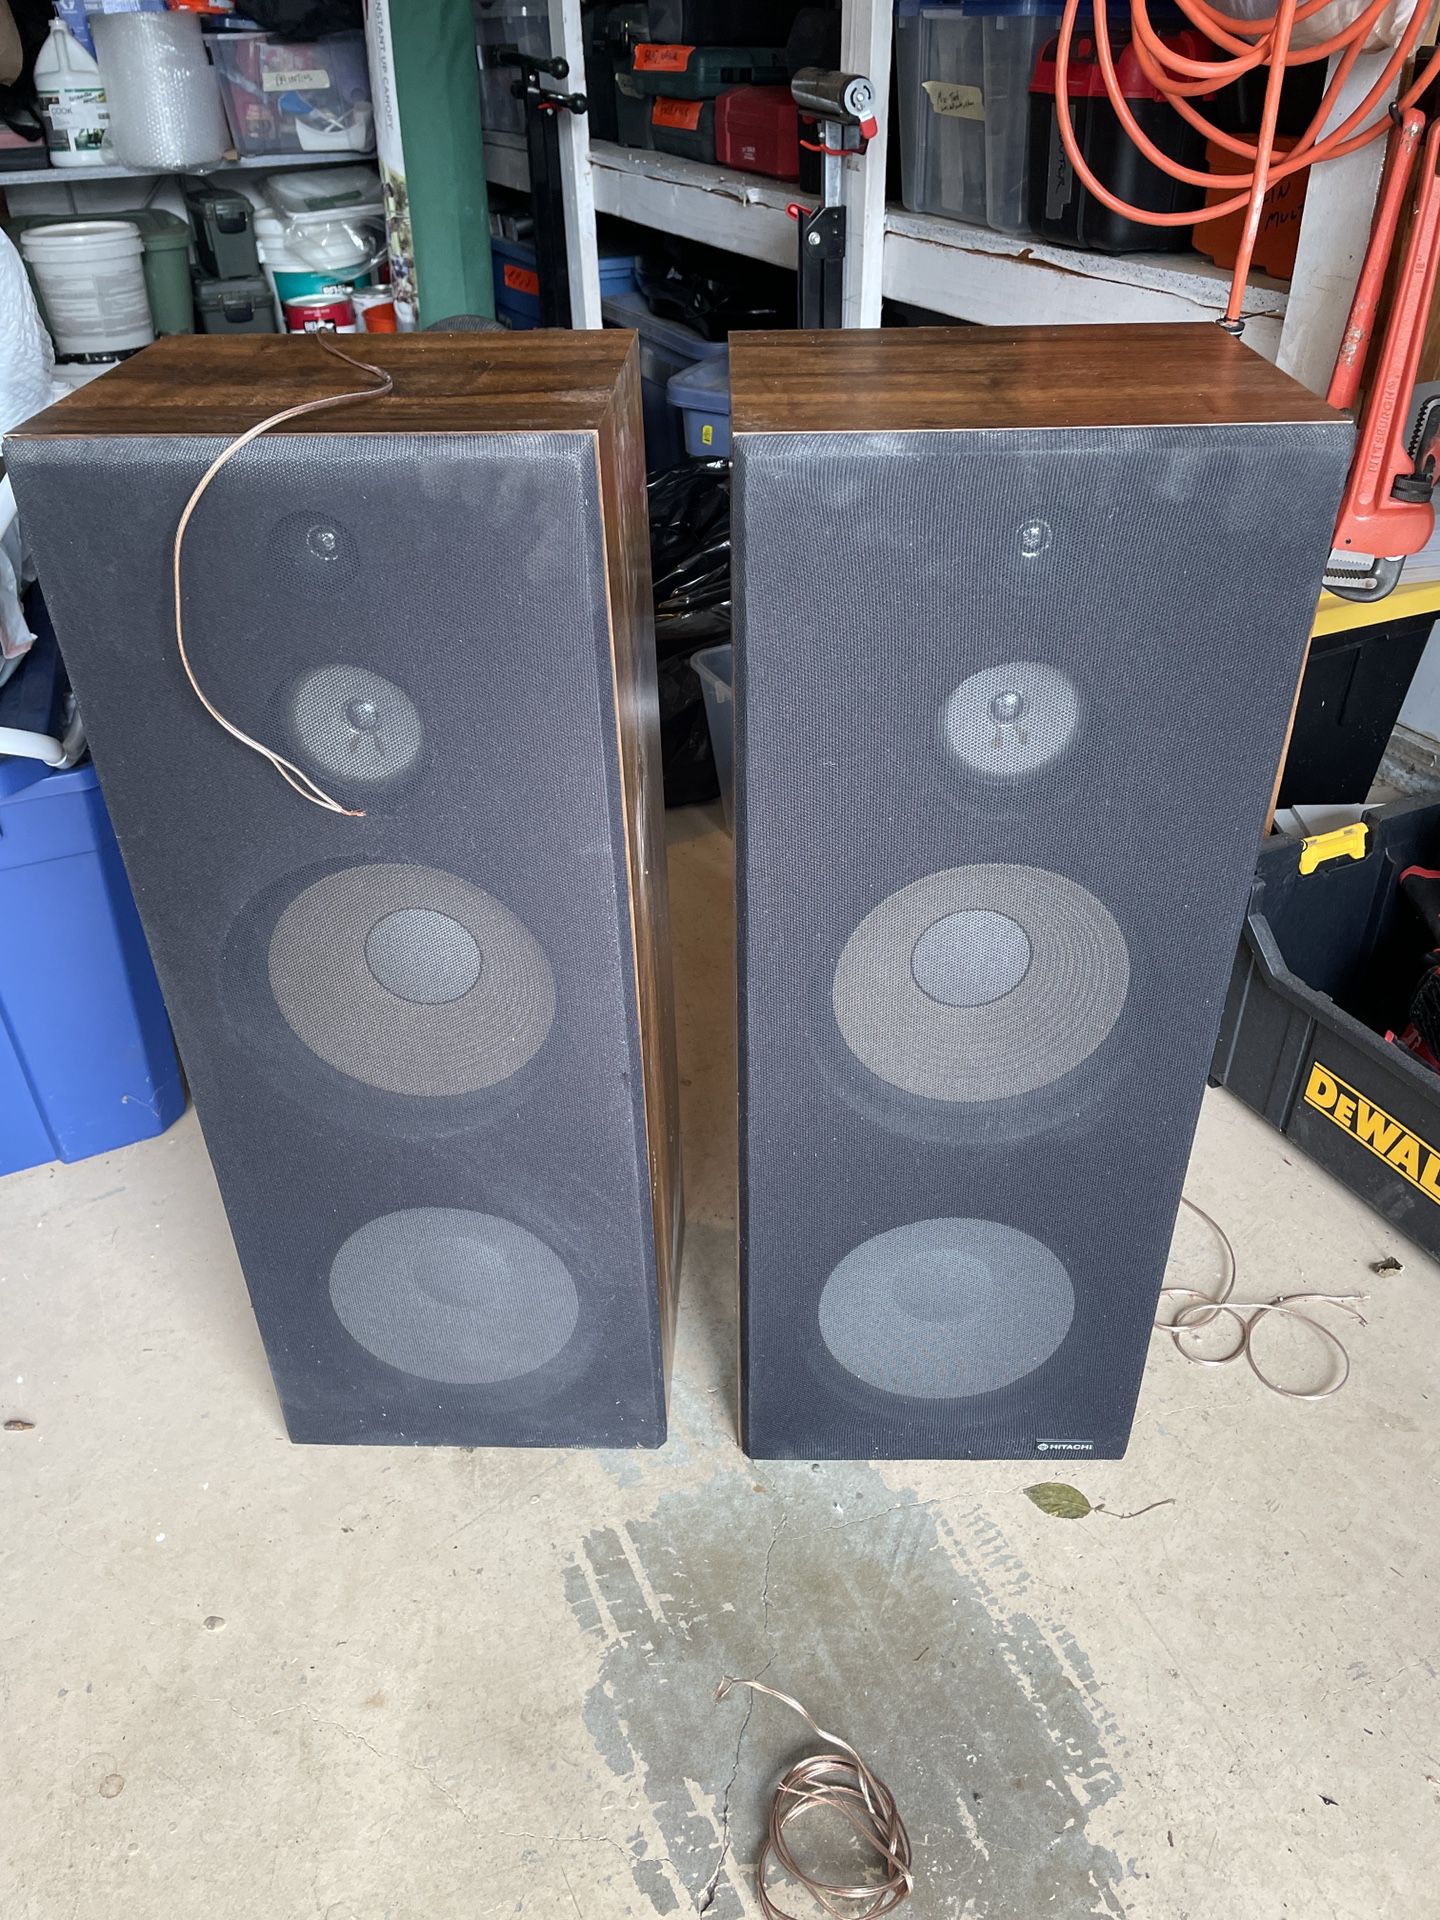 Rare Vintage Hitachi Speakers And Sony Receiver